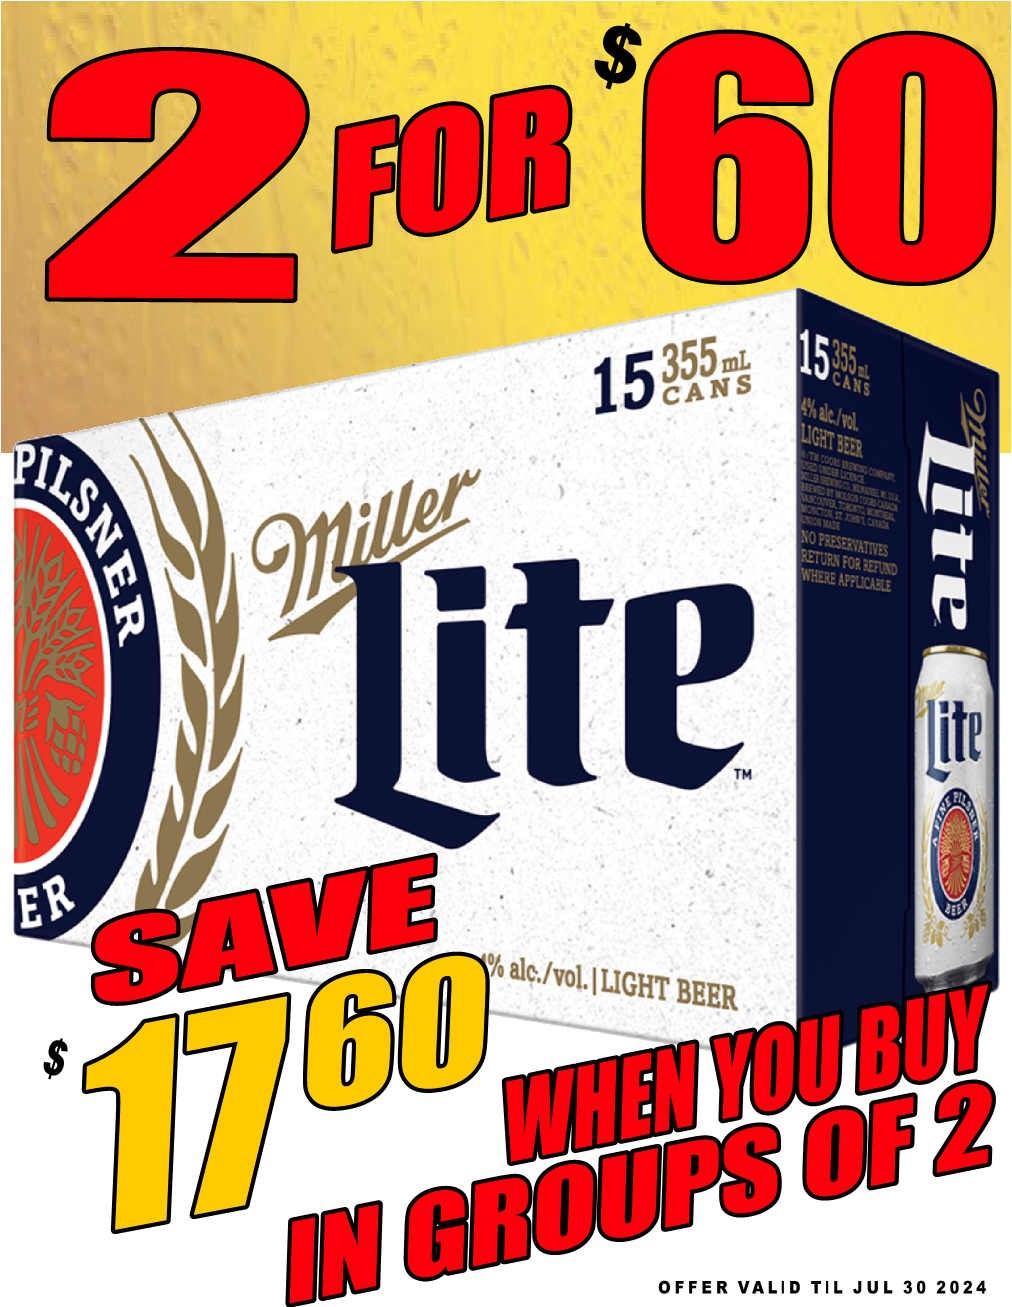 Miller Lite 15AR - 2 for $60!! - $63.00 OUT THE DOOR!!